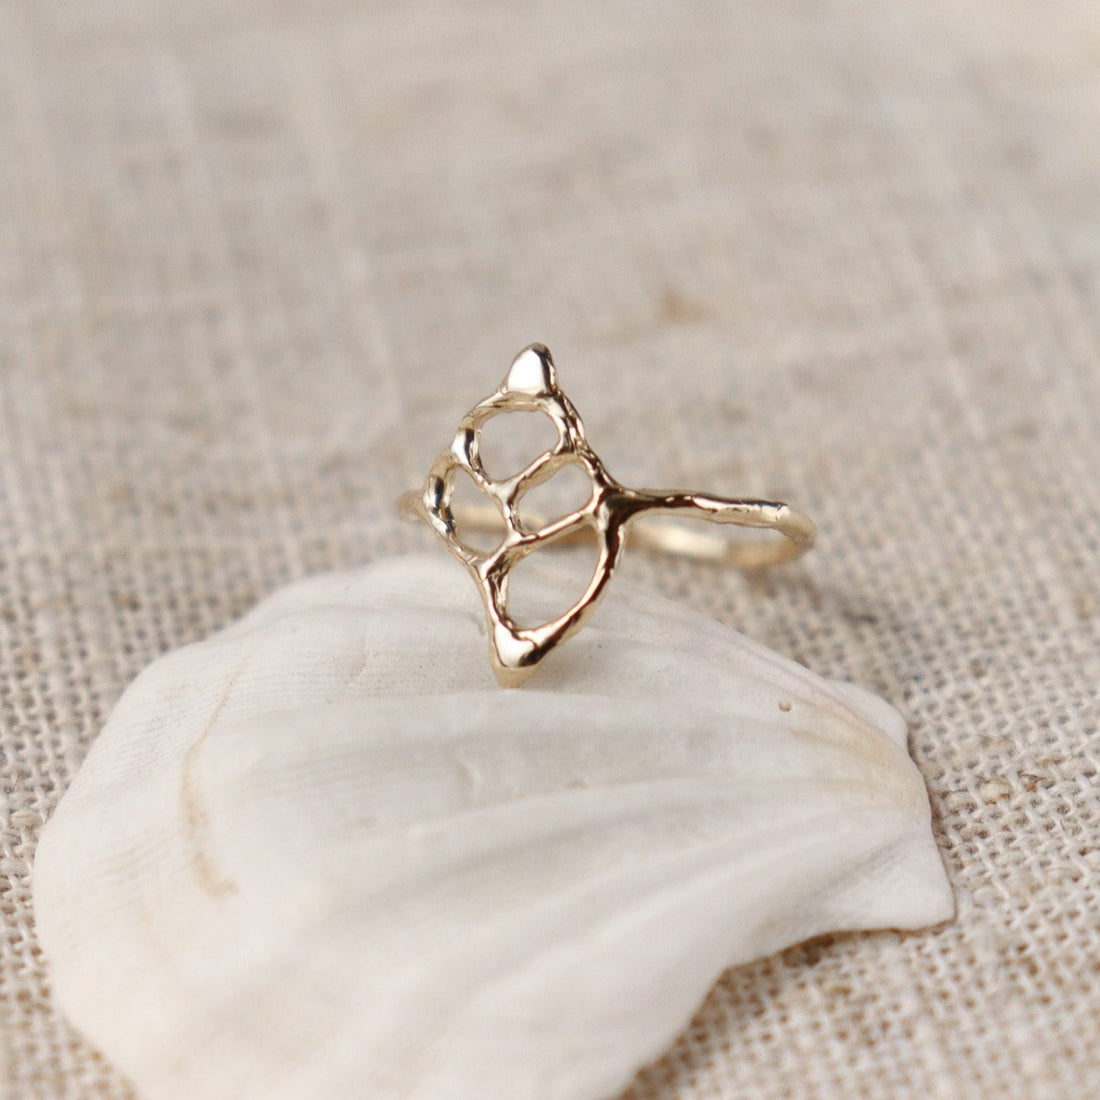 Intricate sea shell ring design resembling a split conch shell, evoking coastal beauty and natural elegance.